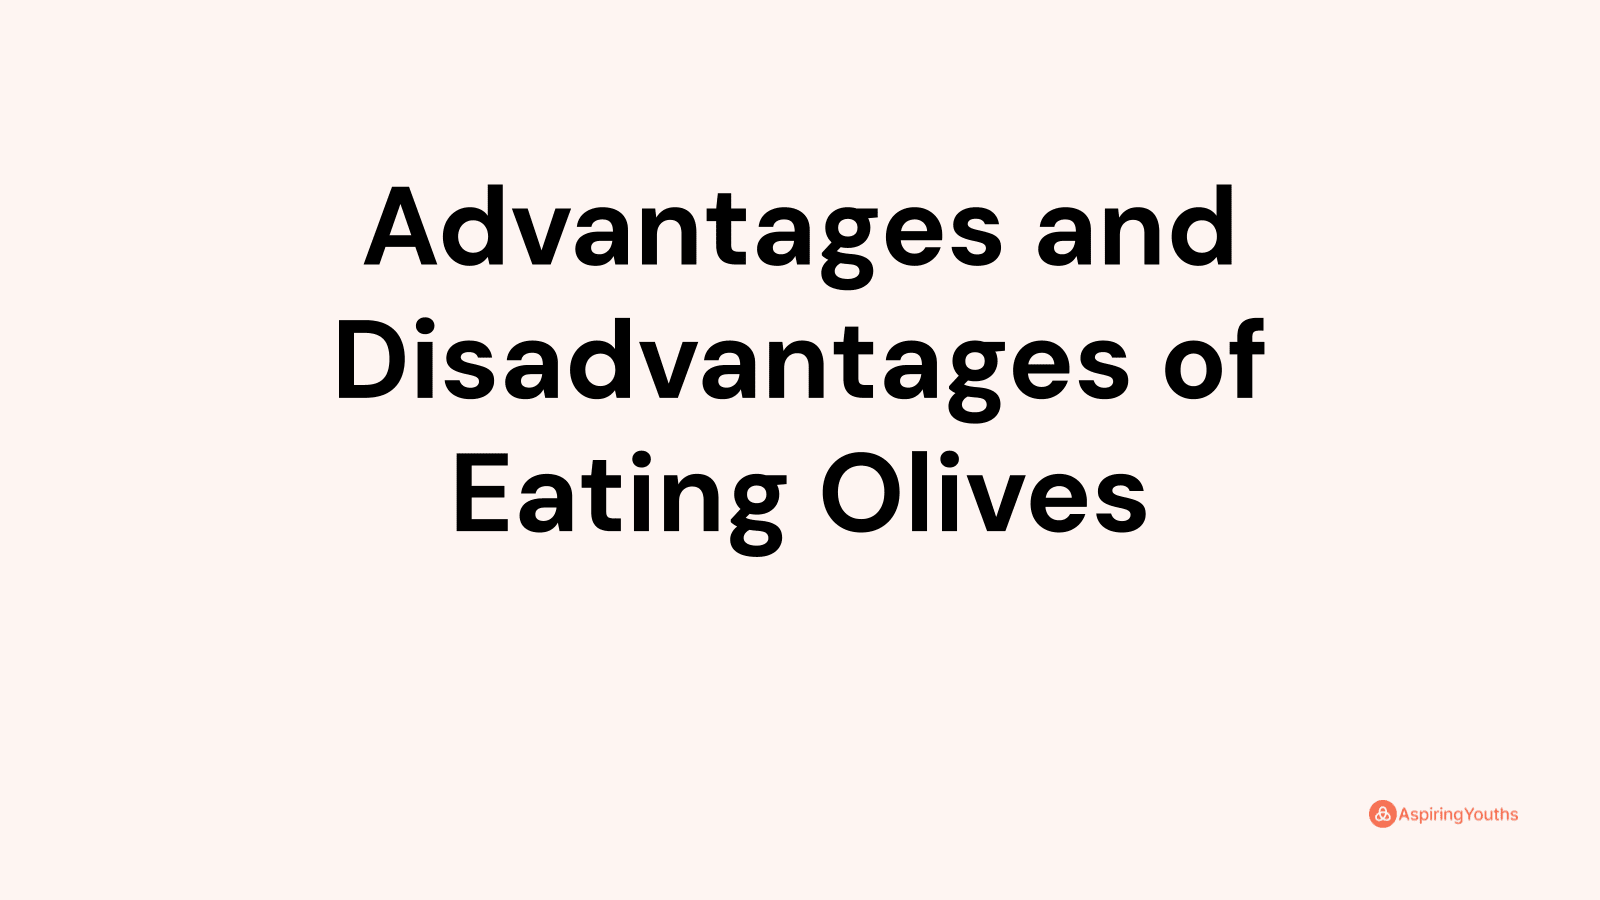 Advantages and disadvantages of Eating Olives